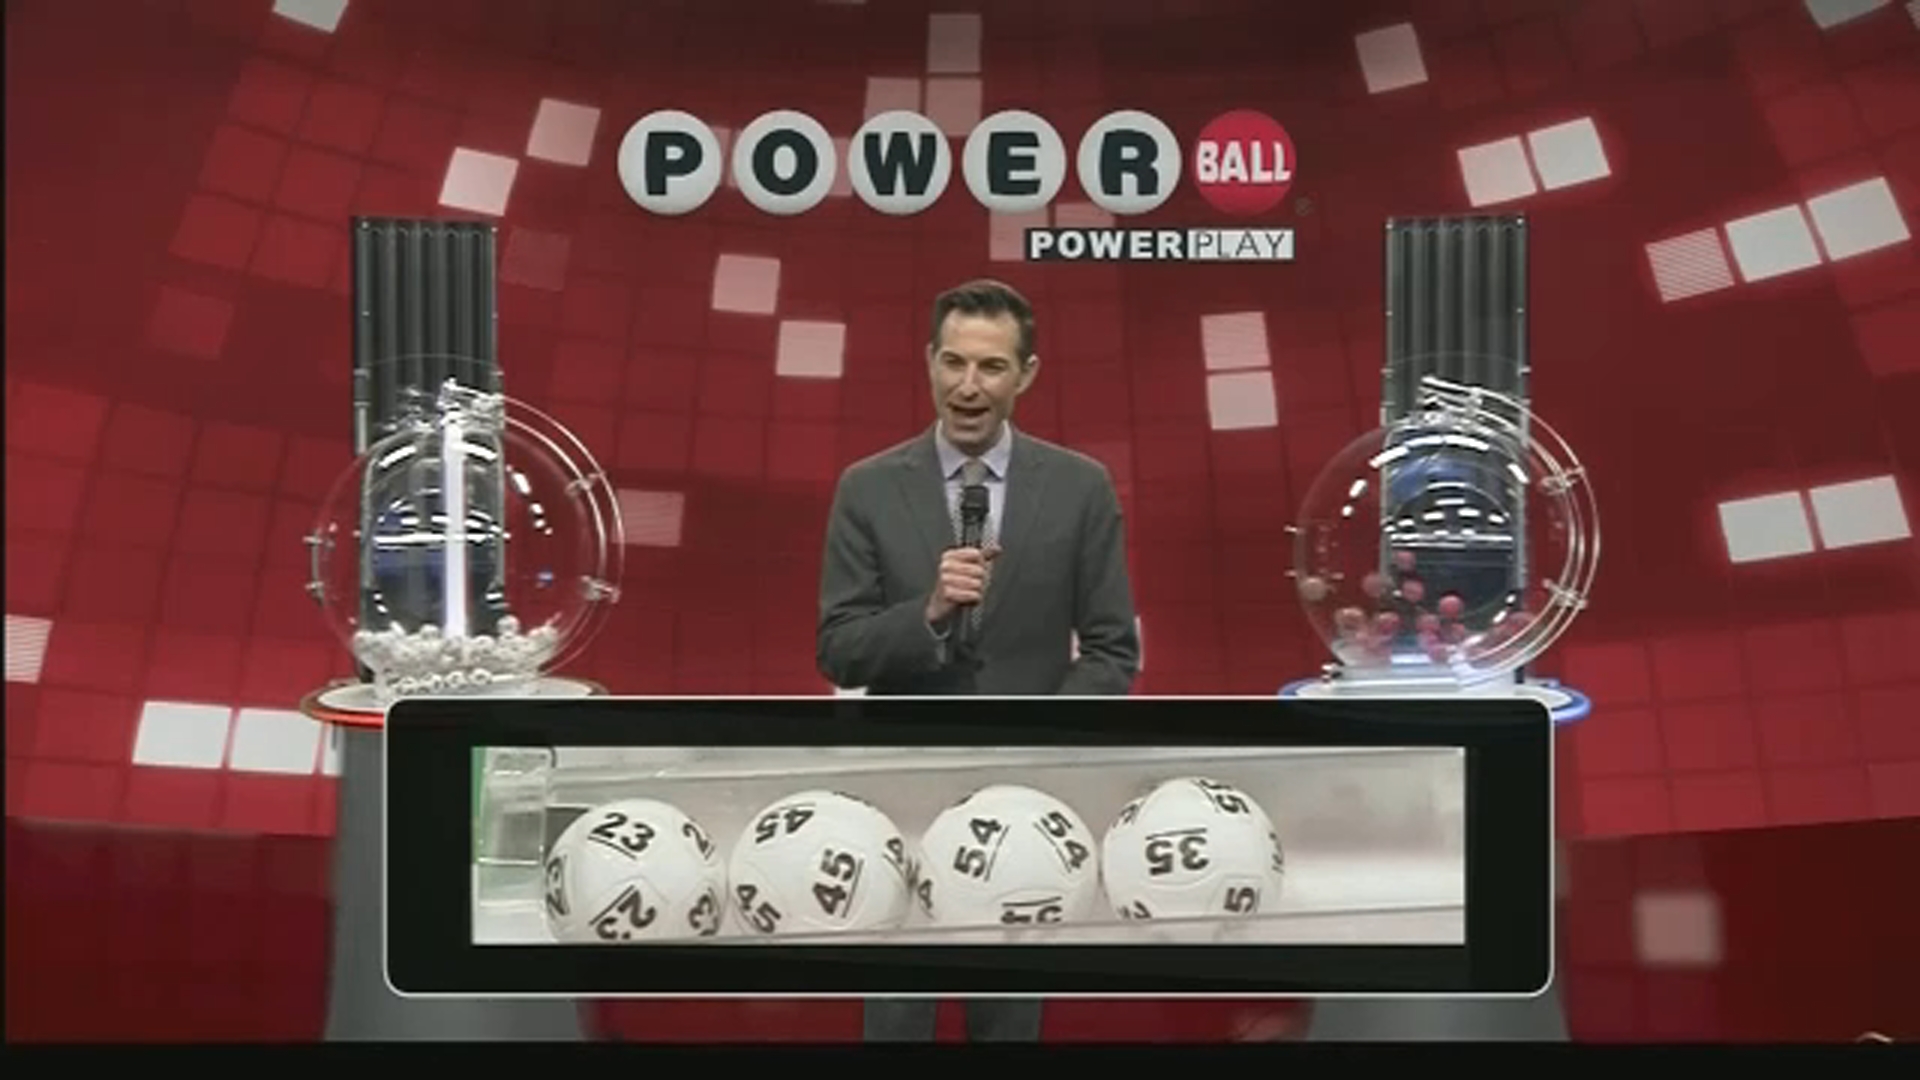 Powerball jackpot soars to $680M after no top winner in Monday’s drawing